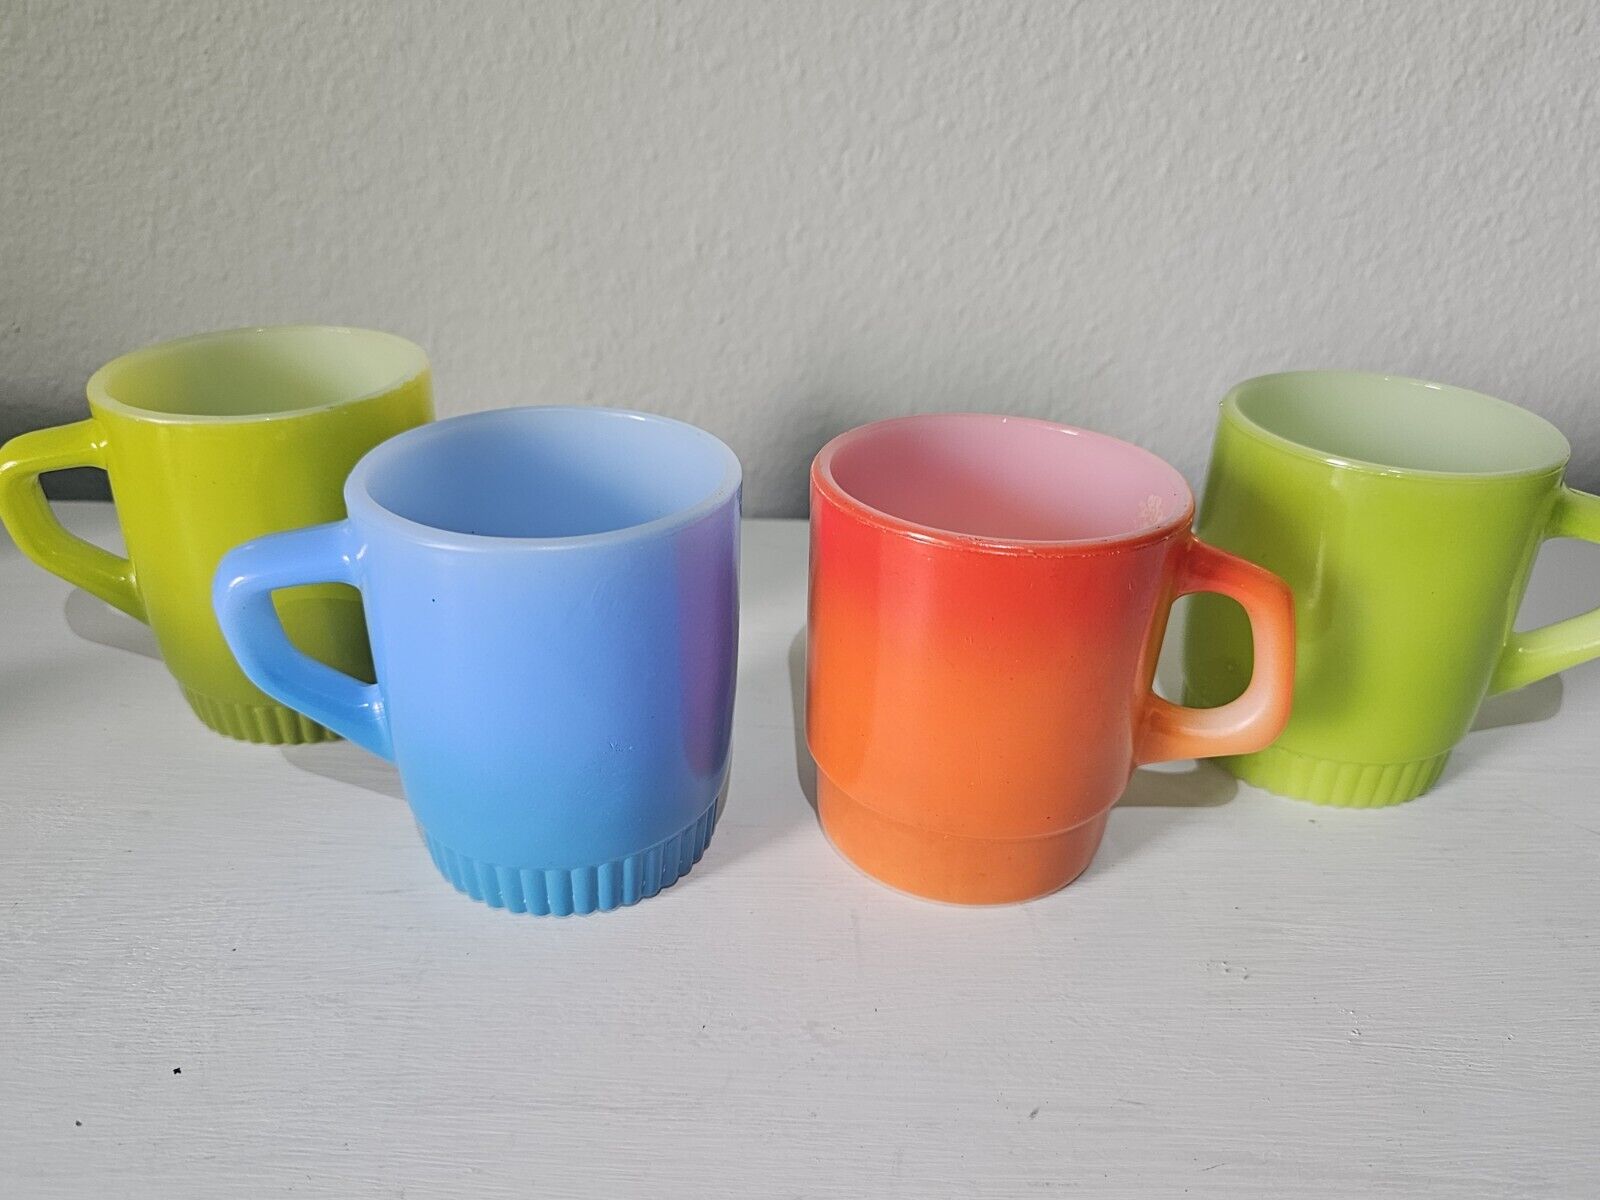 Vintage Fire King Anchor Hocking Set of 4 Coffee Cups - Orange Blue Green